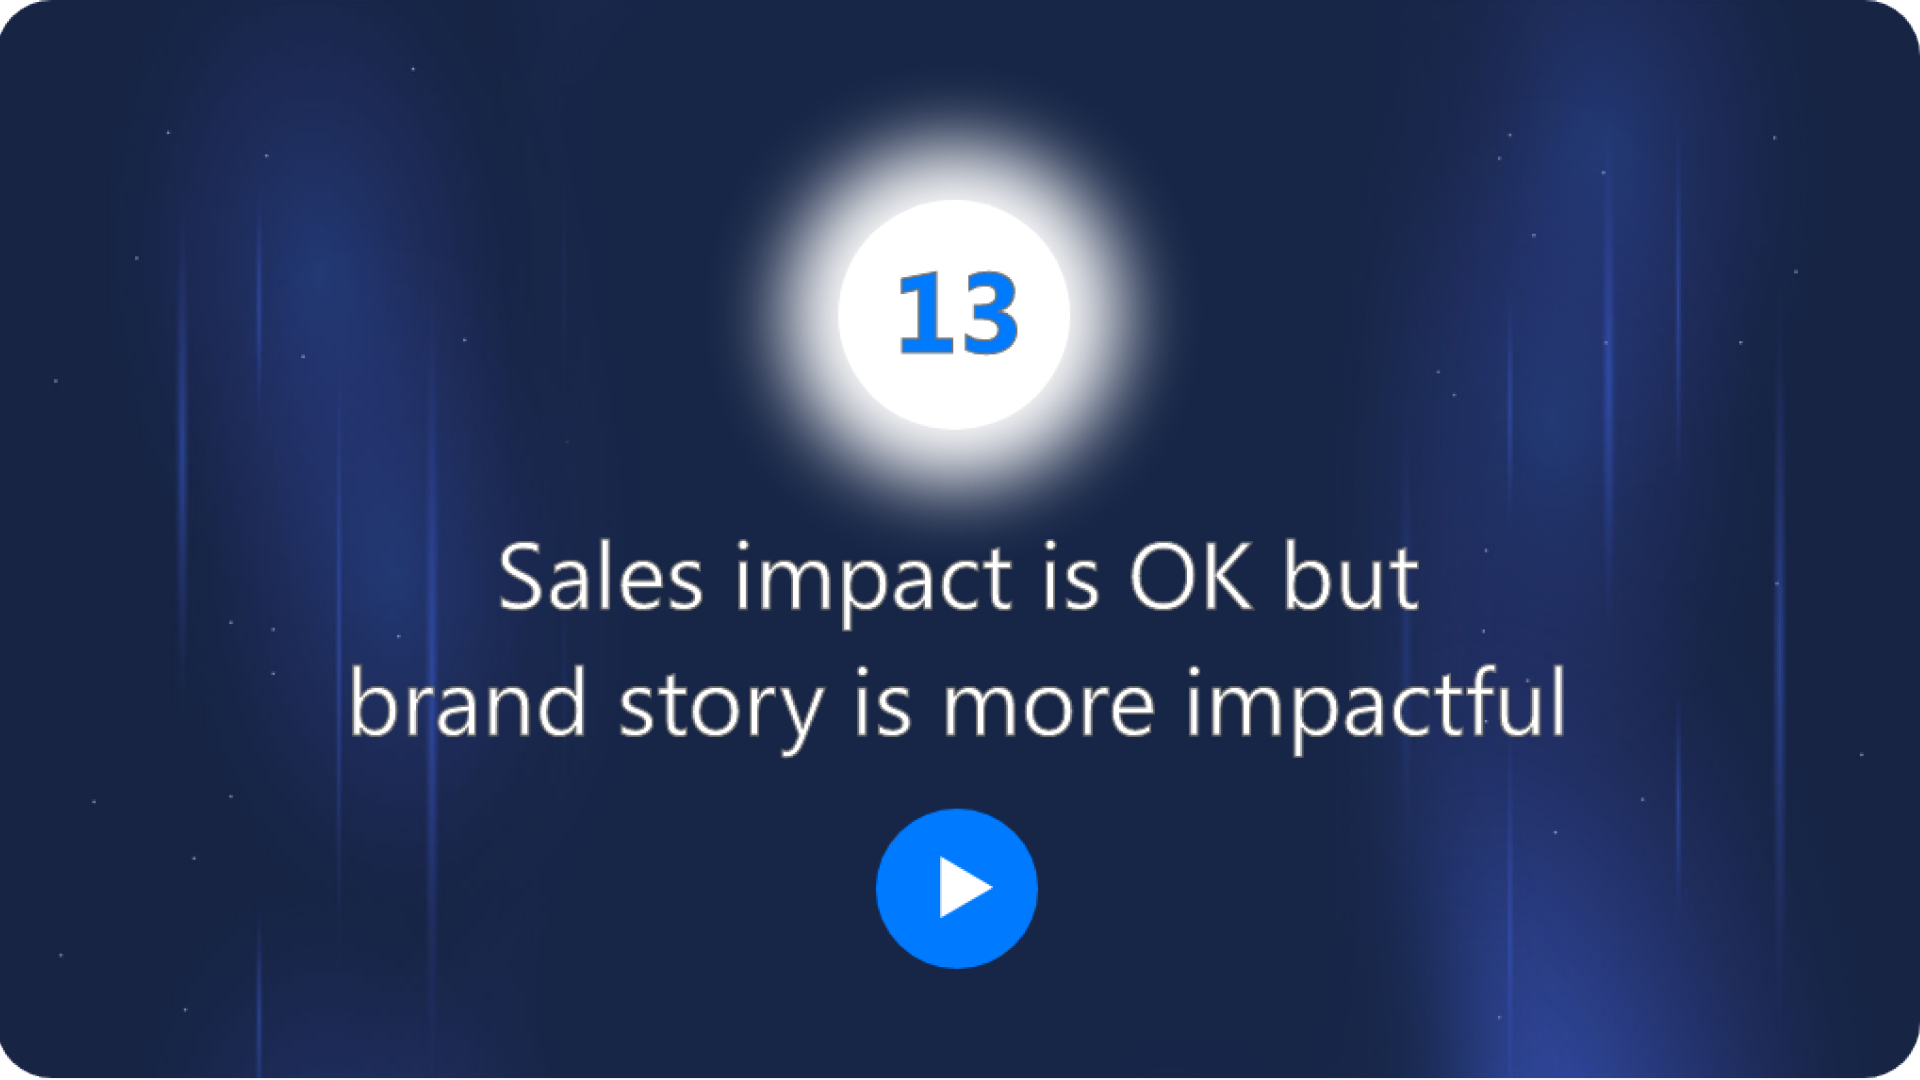 Sales impact is OK but brand story is more impactful